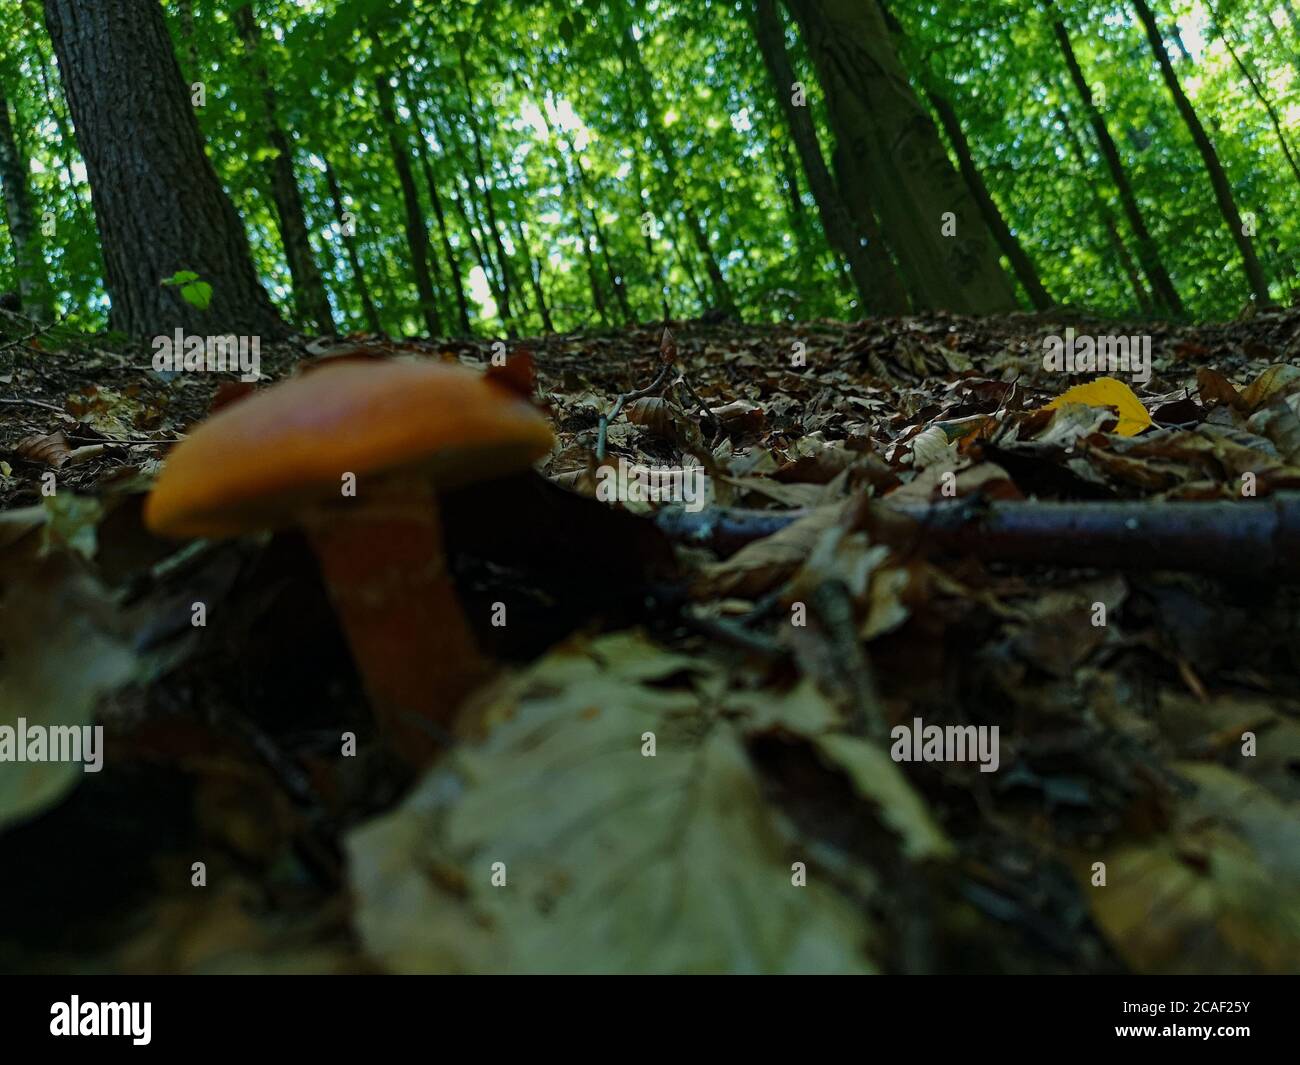 A slick yellow mushroom in a green pine tree forest with the focus on the green forest Stock Photo